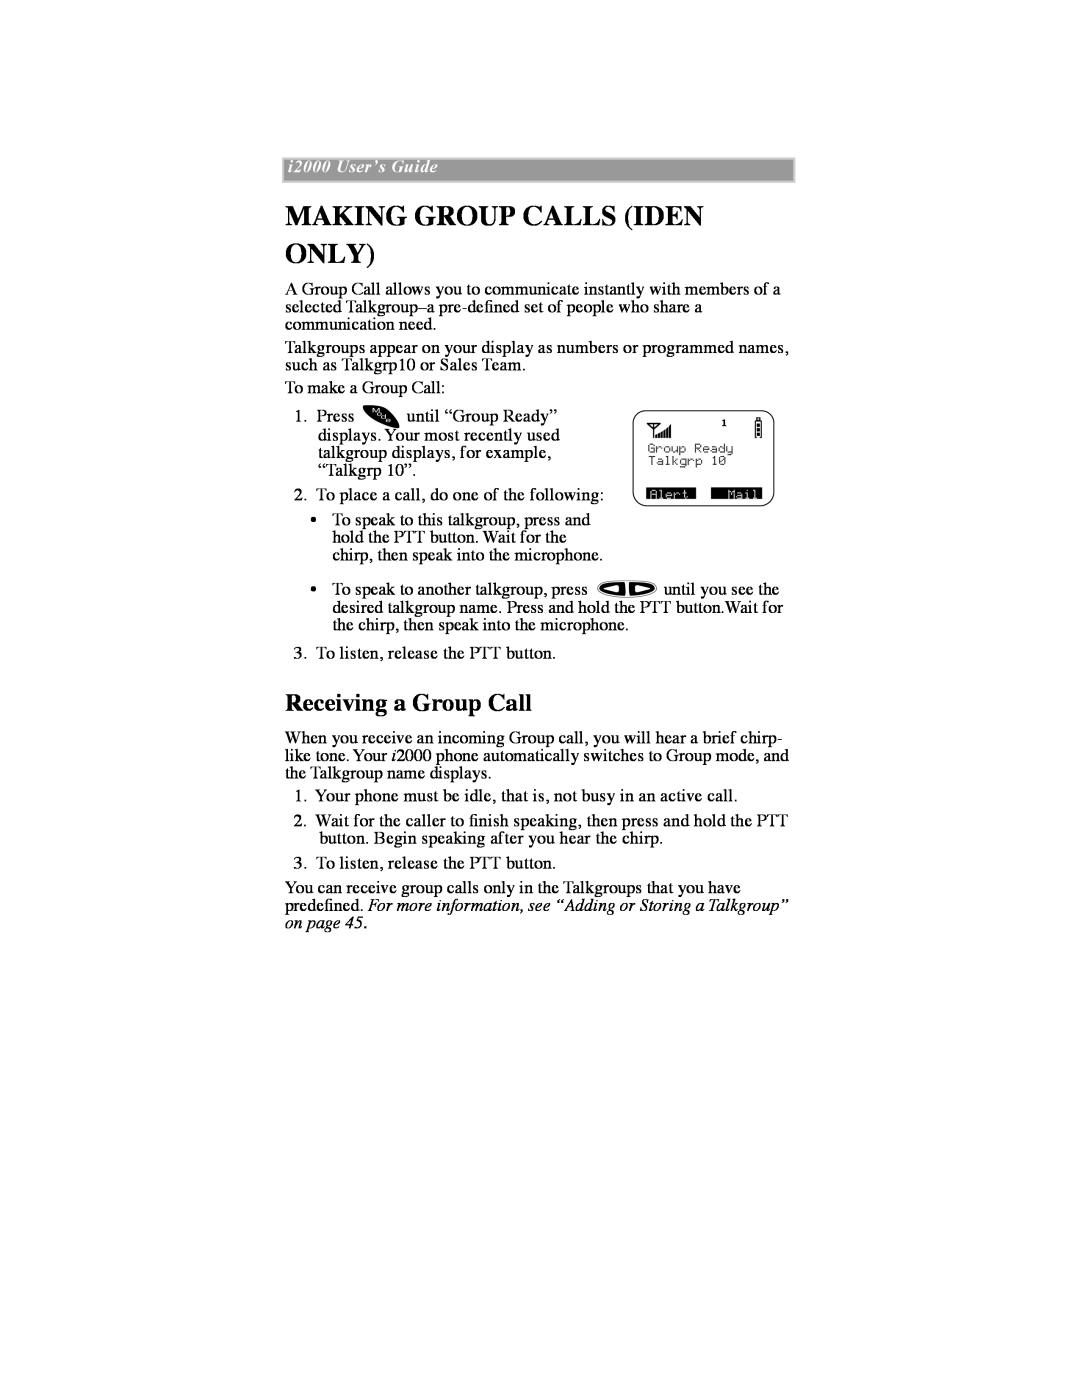 Motorola iDEN manual Making Group Calls Iden Only, Receiving a Group Call, i2000 UserÕs Guide 